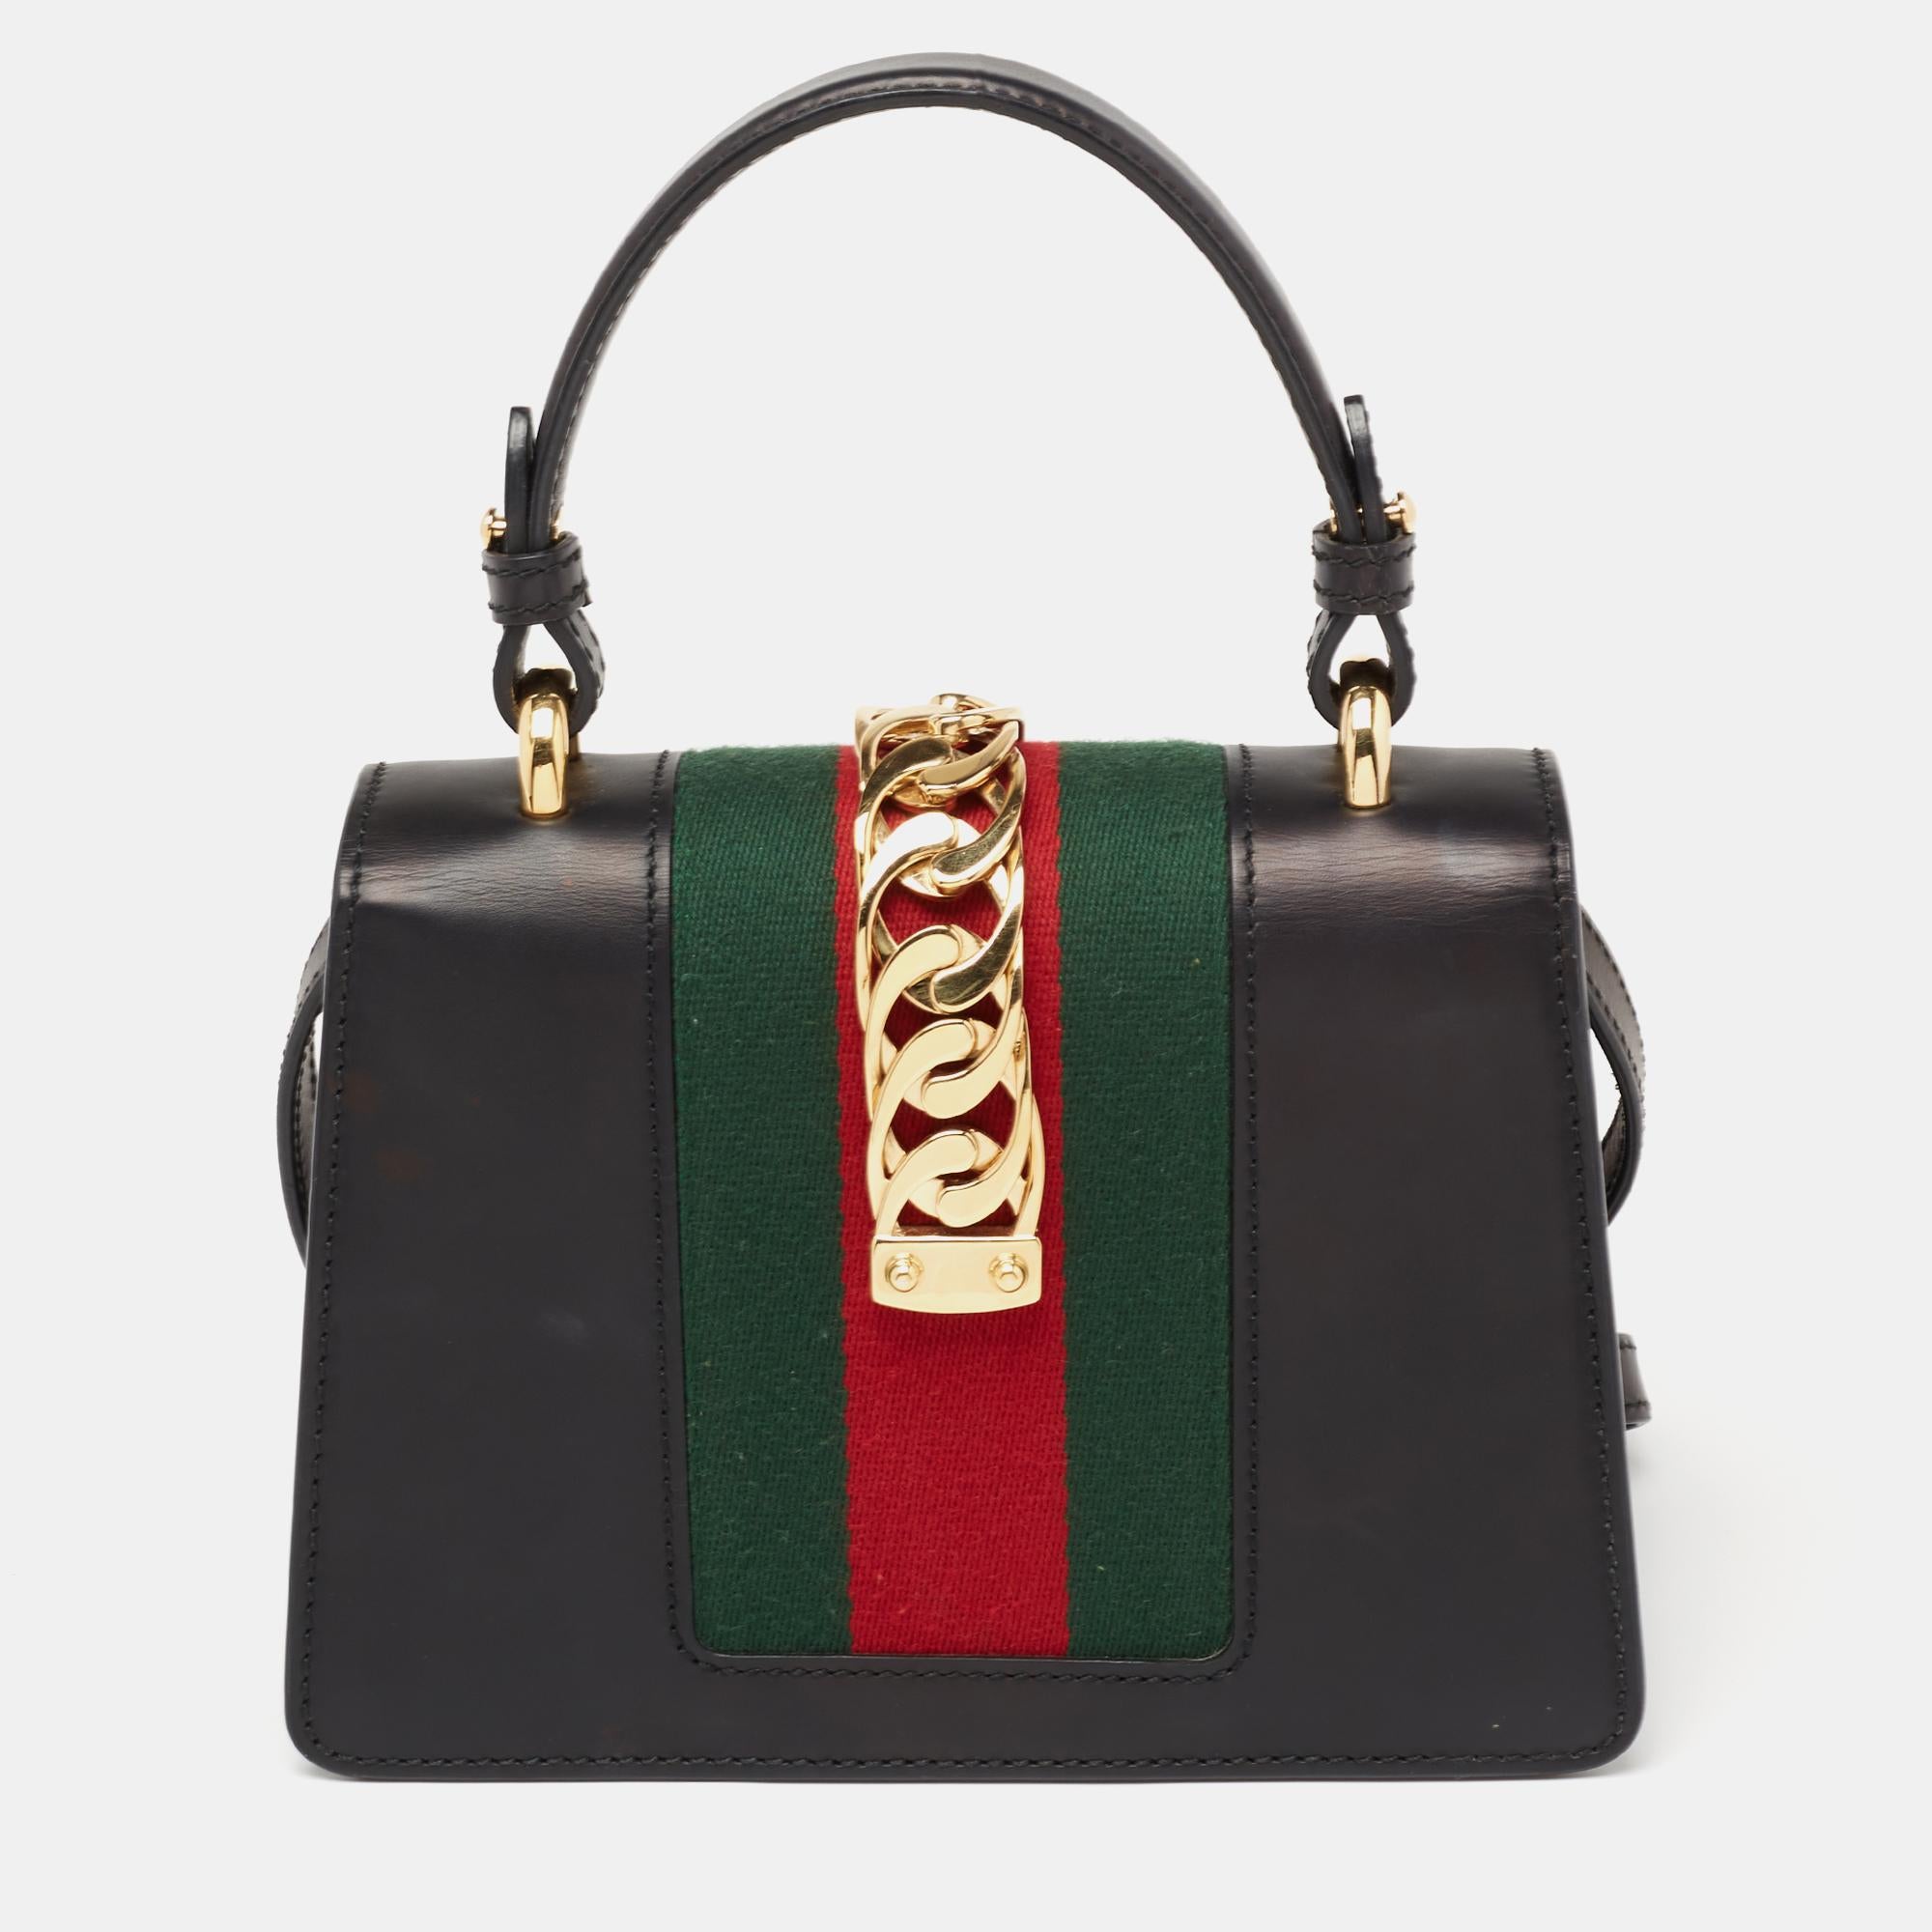 Gucci's Sylvie bag brings House codes and high-grade materials with a contemporary design. This Mini Sylvie is crafted using black leather and styled with a chain-Web decorated flap and a buckle lock to secure the Alcantara interior. The bag is